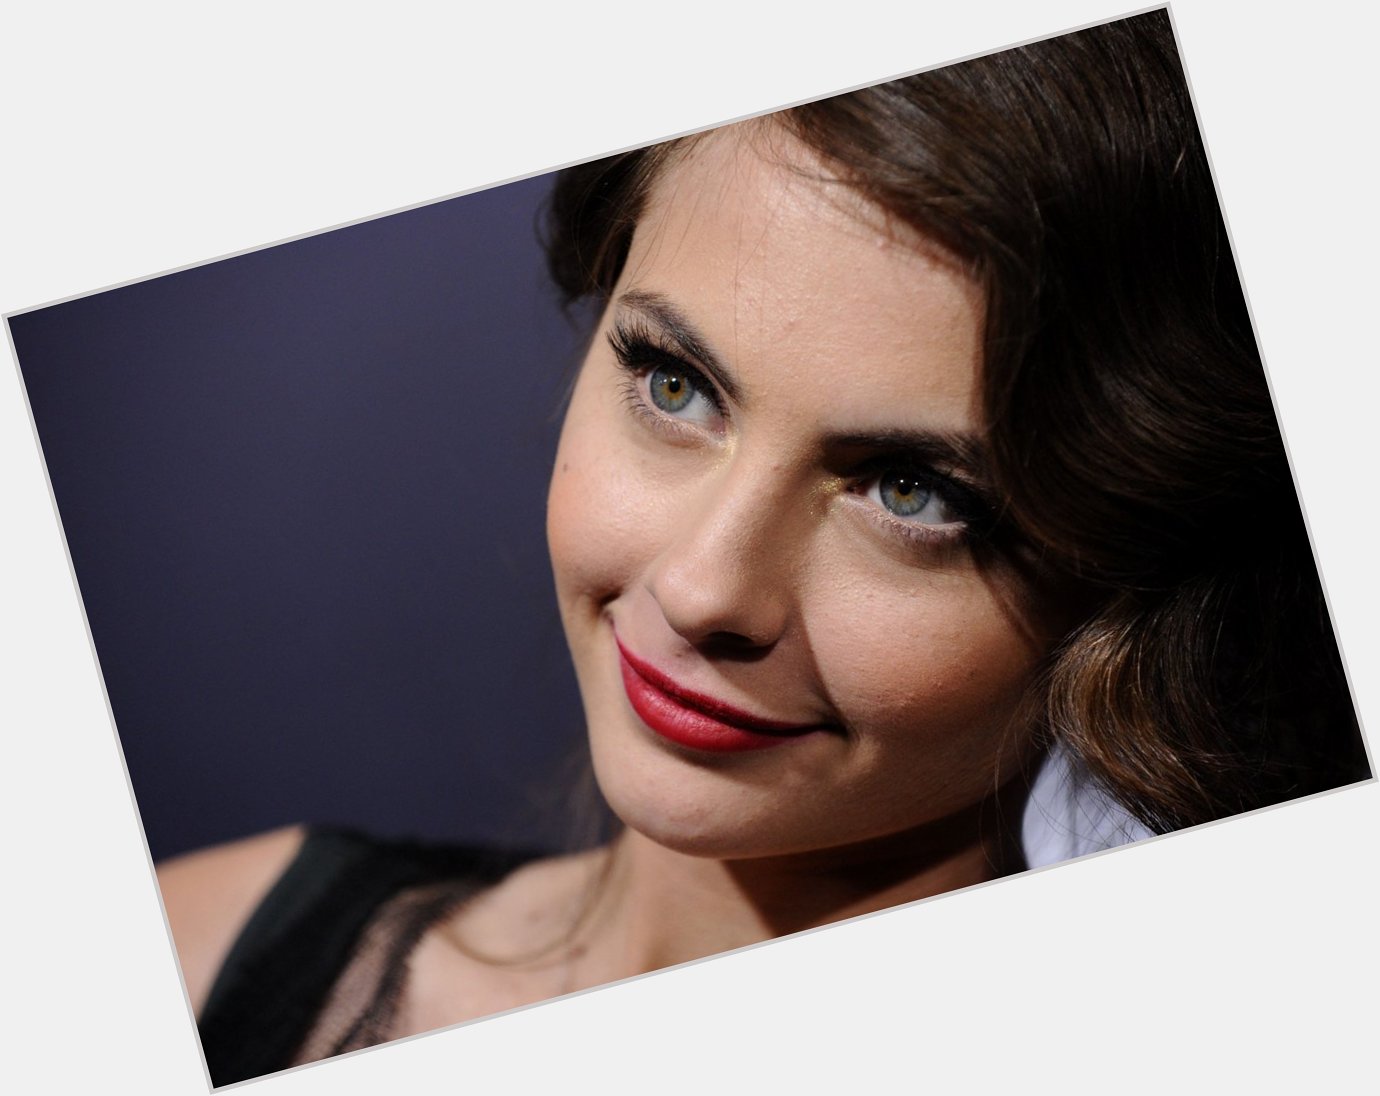 Happy Birthday to the lovely Willa Holland! Enjoy your day, Speedy. Get back in costume soon, ya hear? 